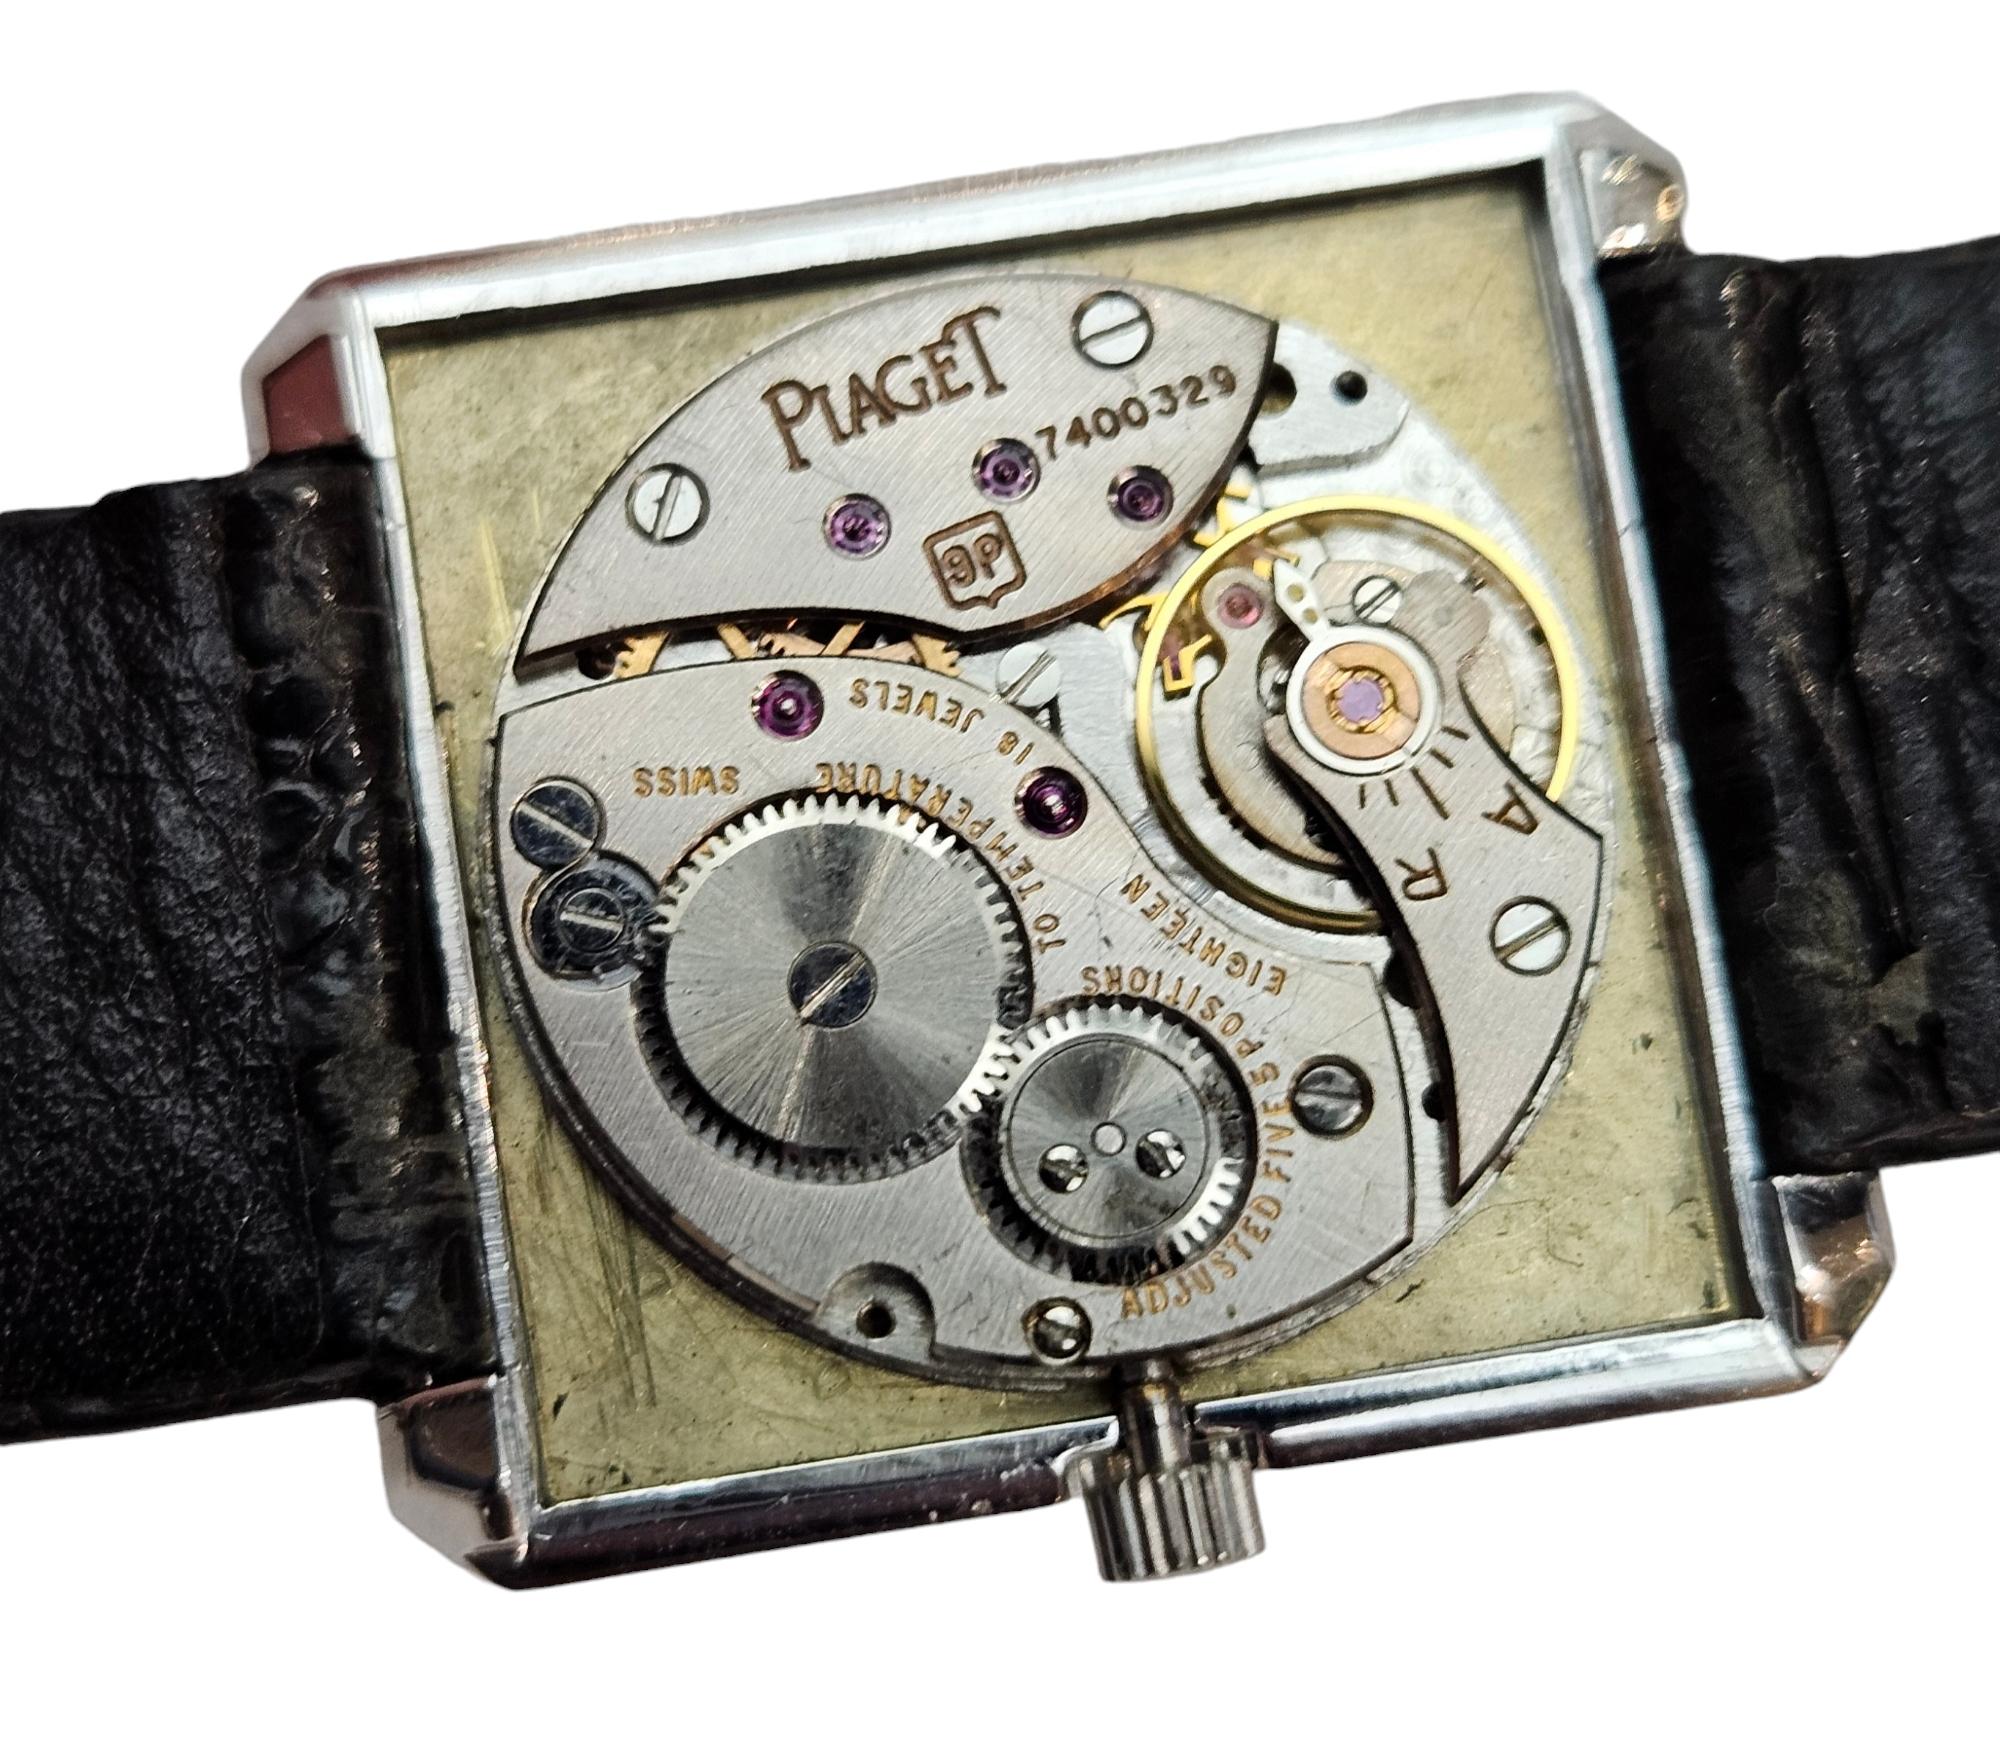 18 Kt White Gold Piaget Protocole Wrist Watch, Manual Winding For Sale 7